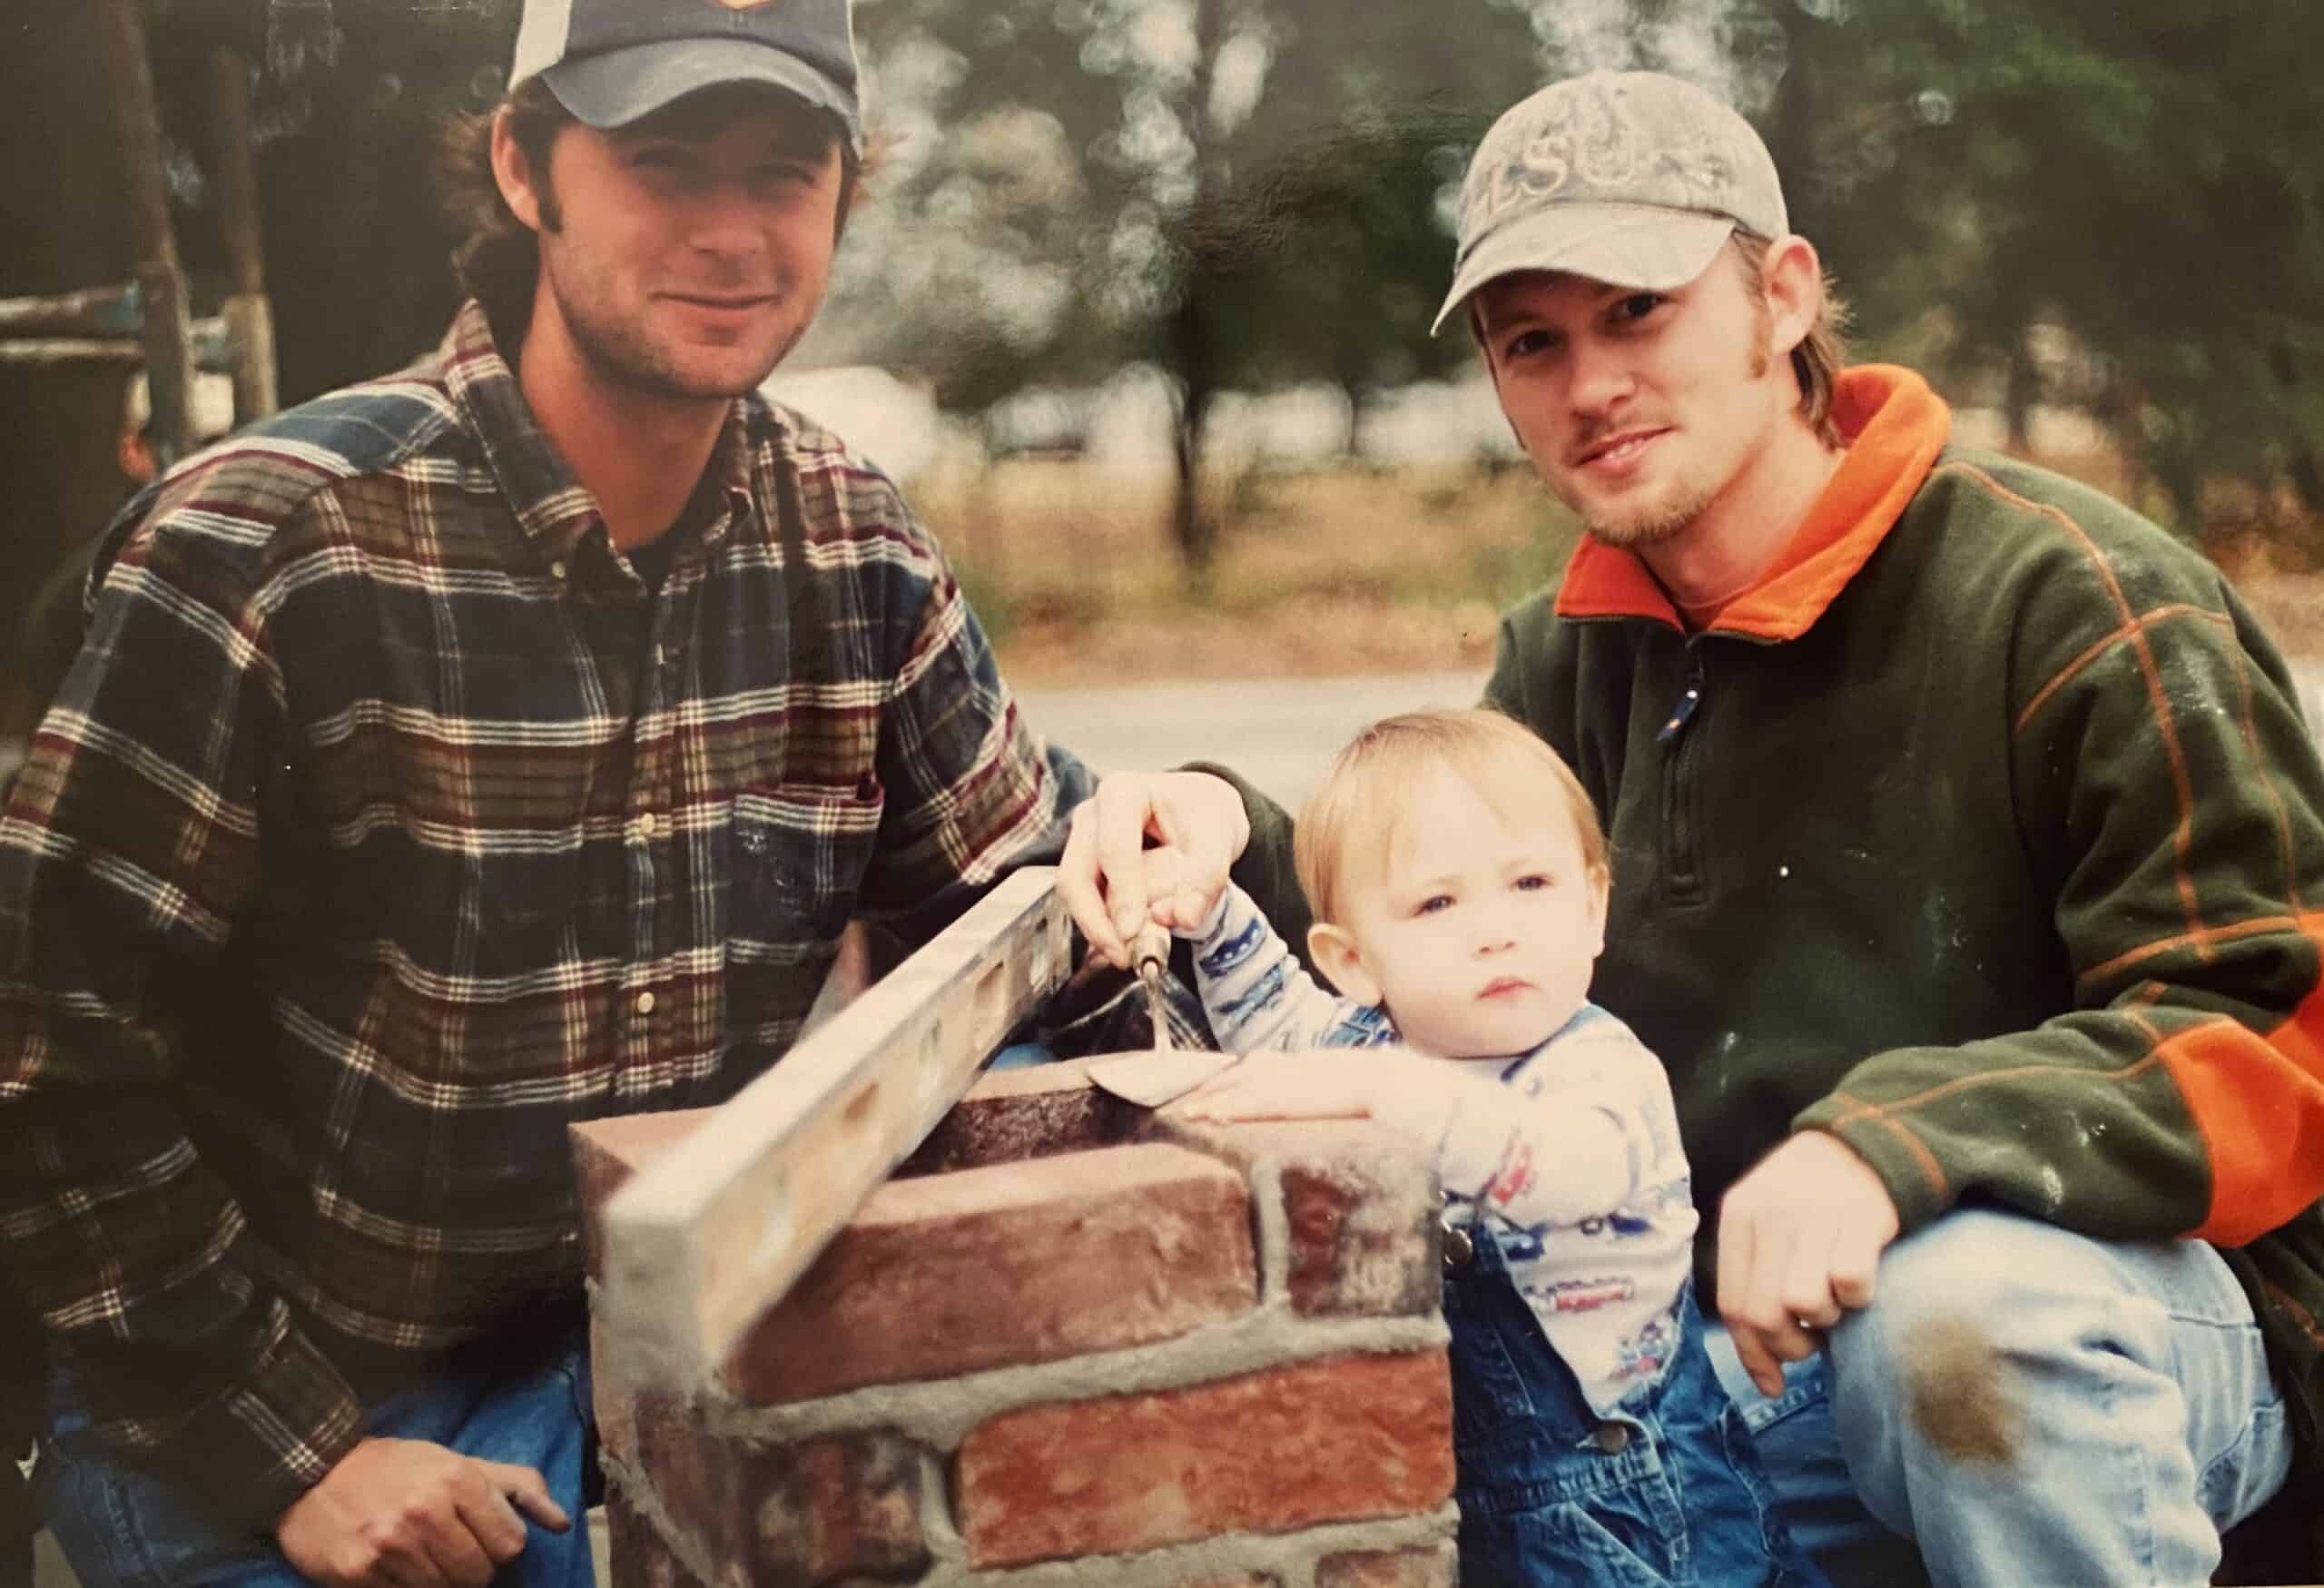 This photo, taken about 20 years ago, shows Donnie (left), Philip (right) and Philip's son, Dillon. 